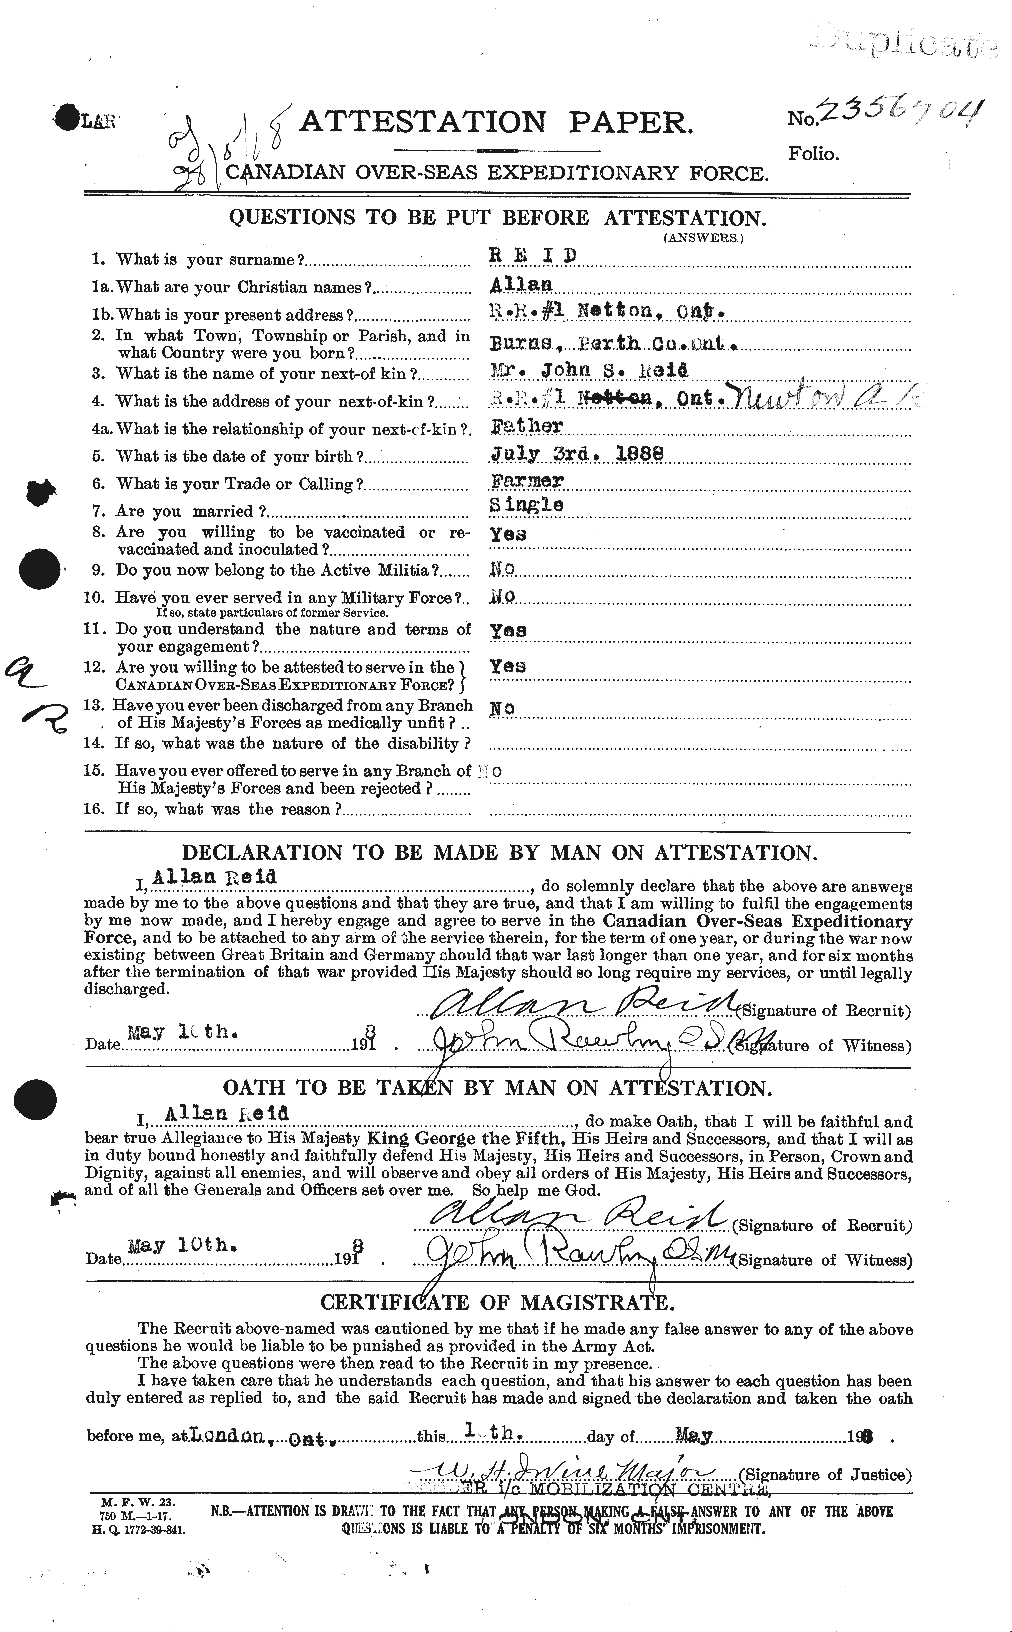 Personnel Records of the First World War - CEF 597799a